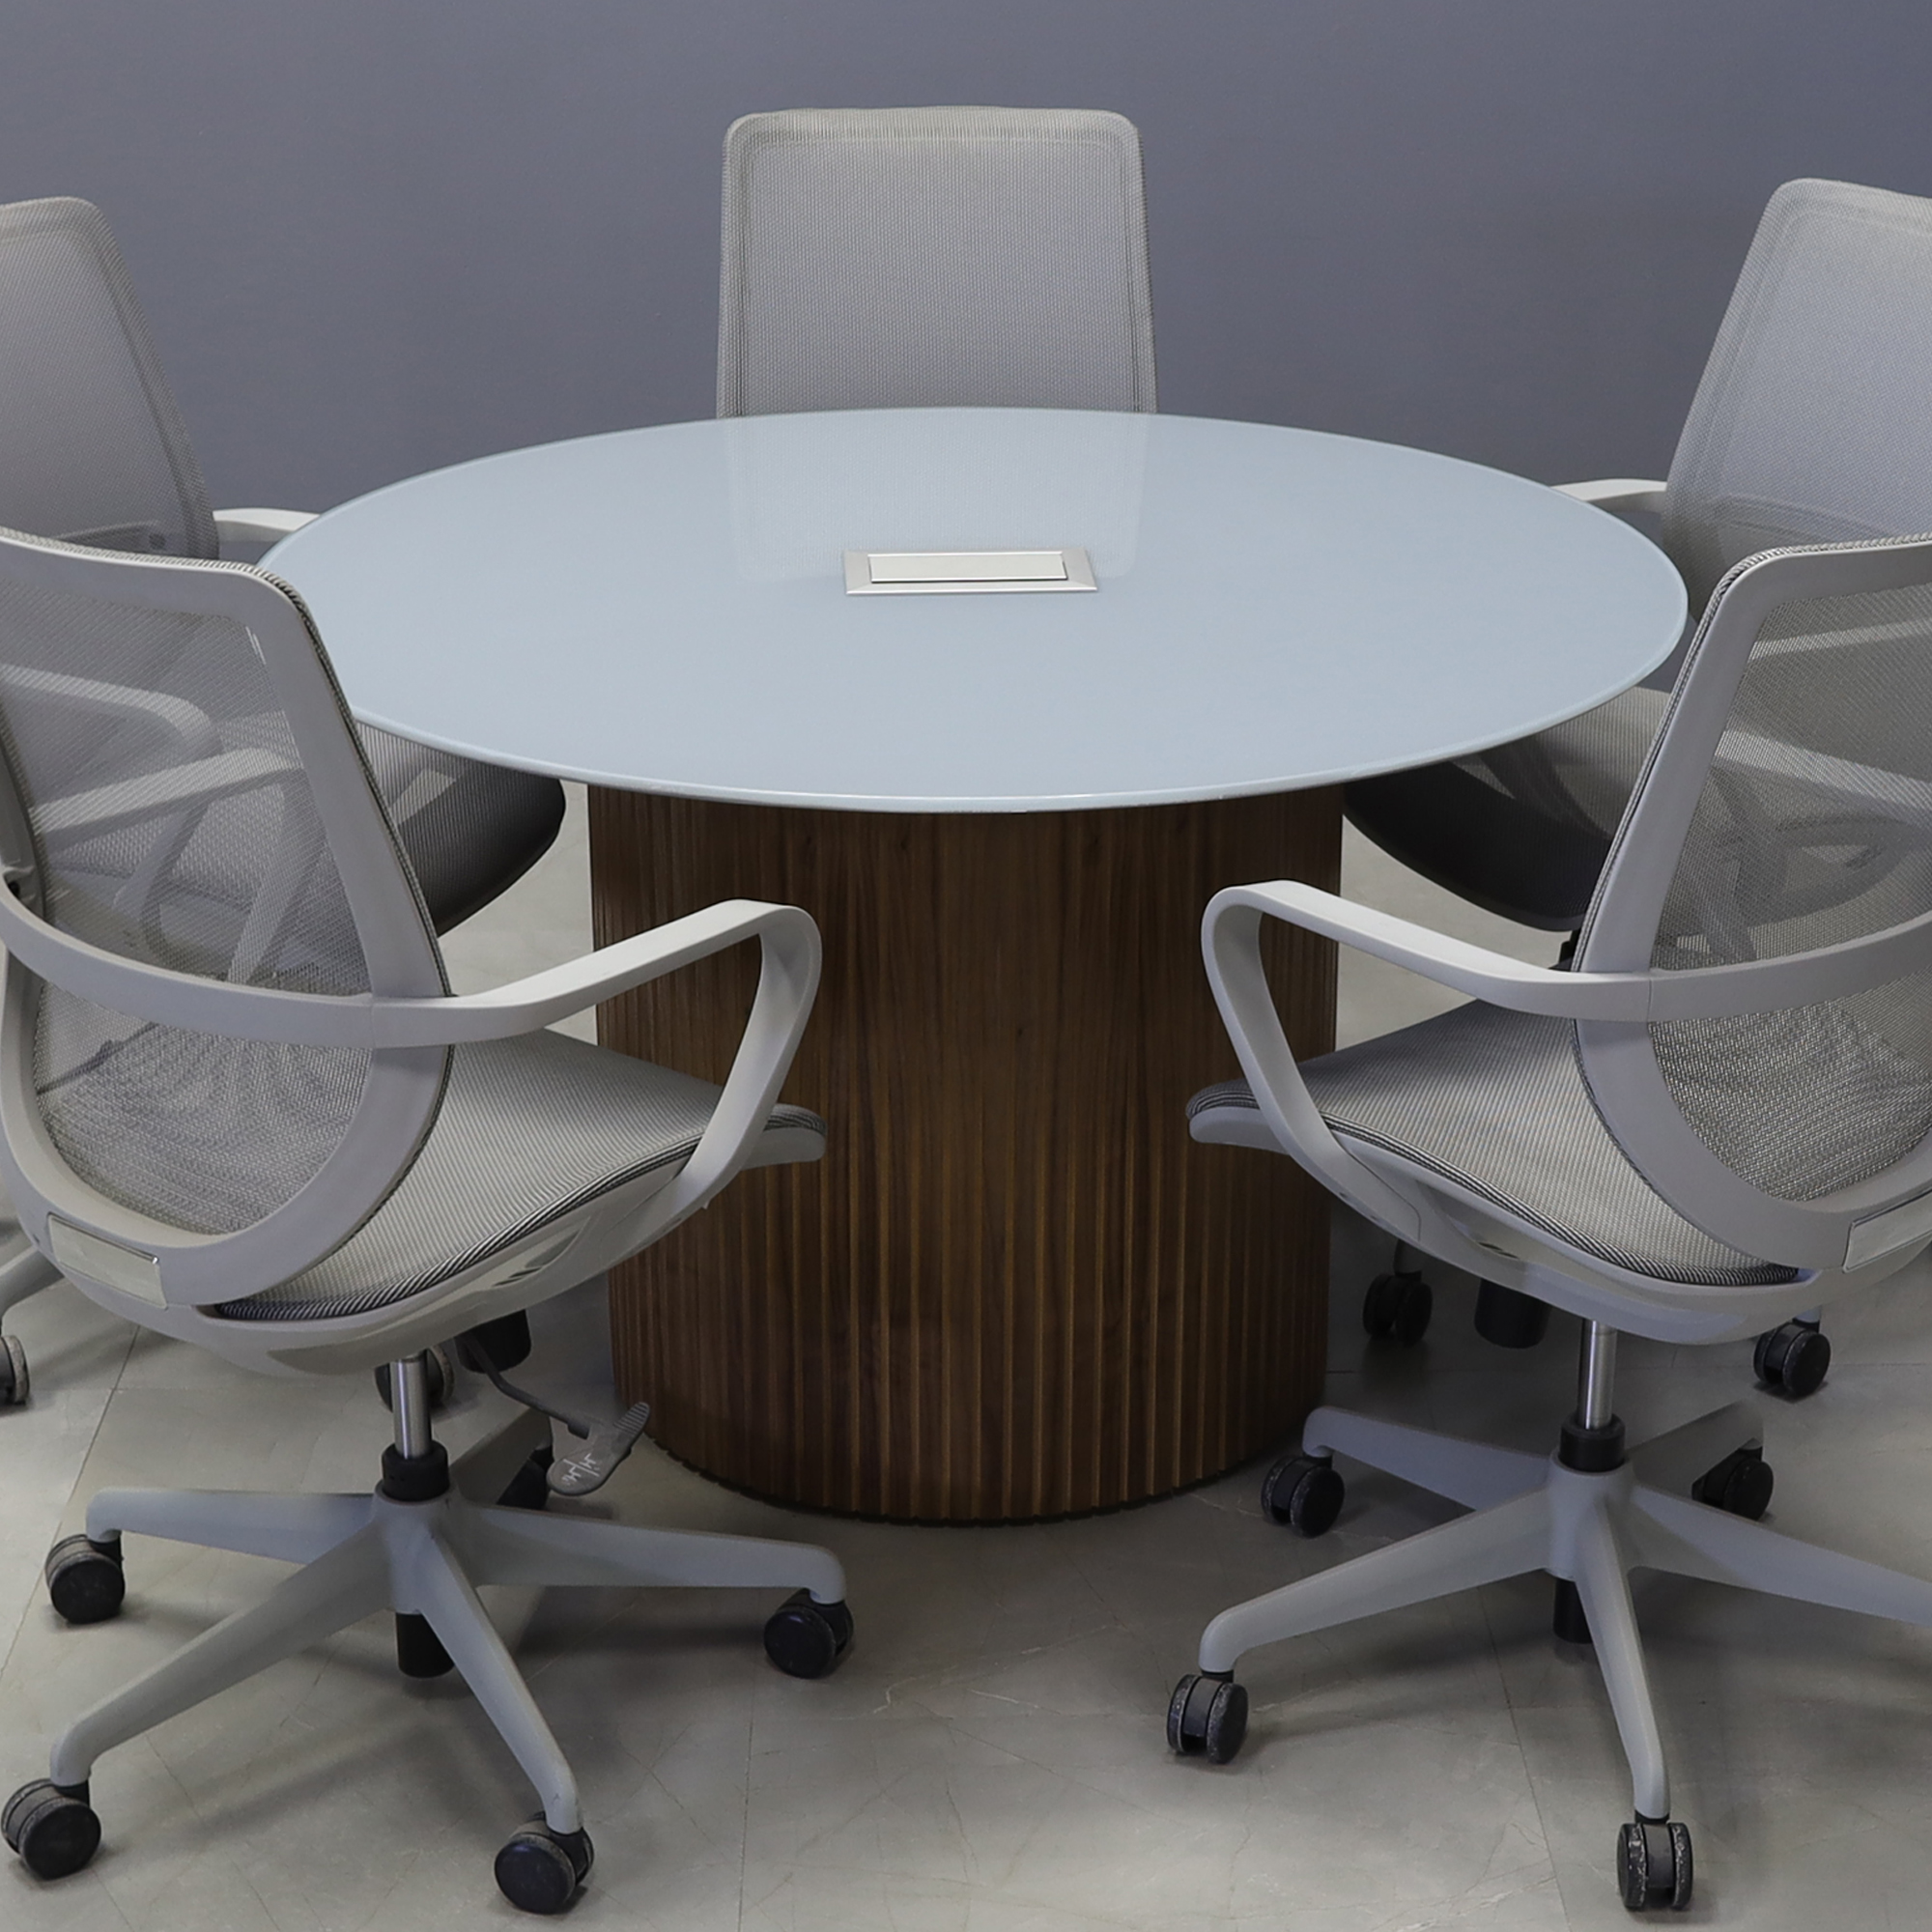 48-inch Omaha Round Conference Table in 1/2